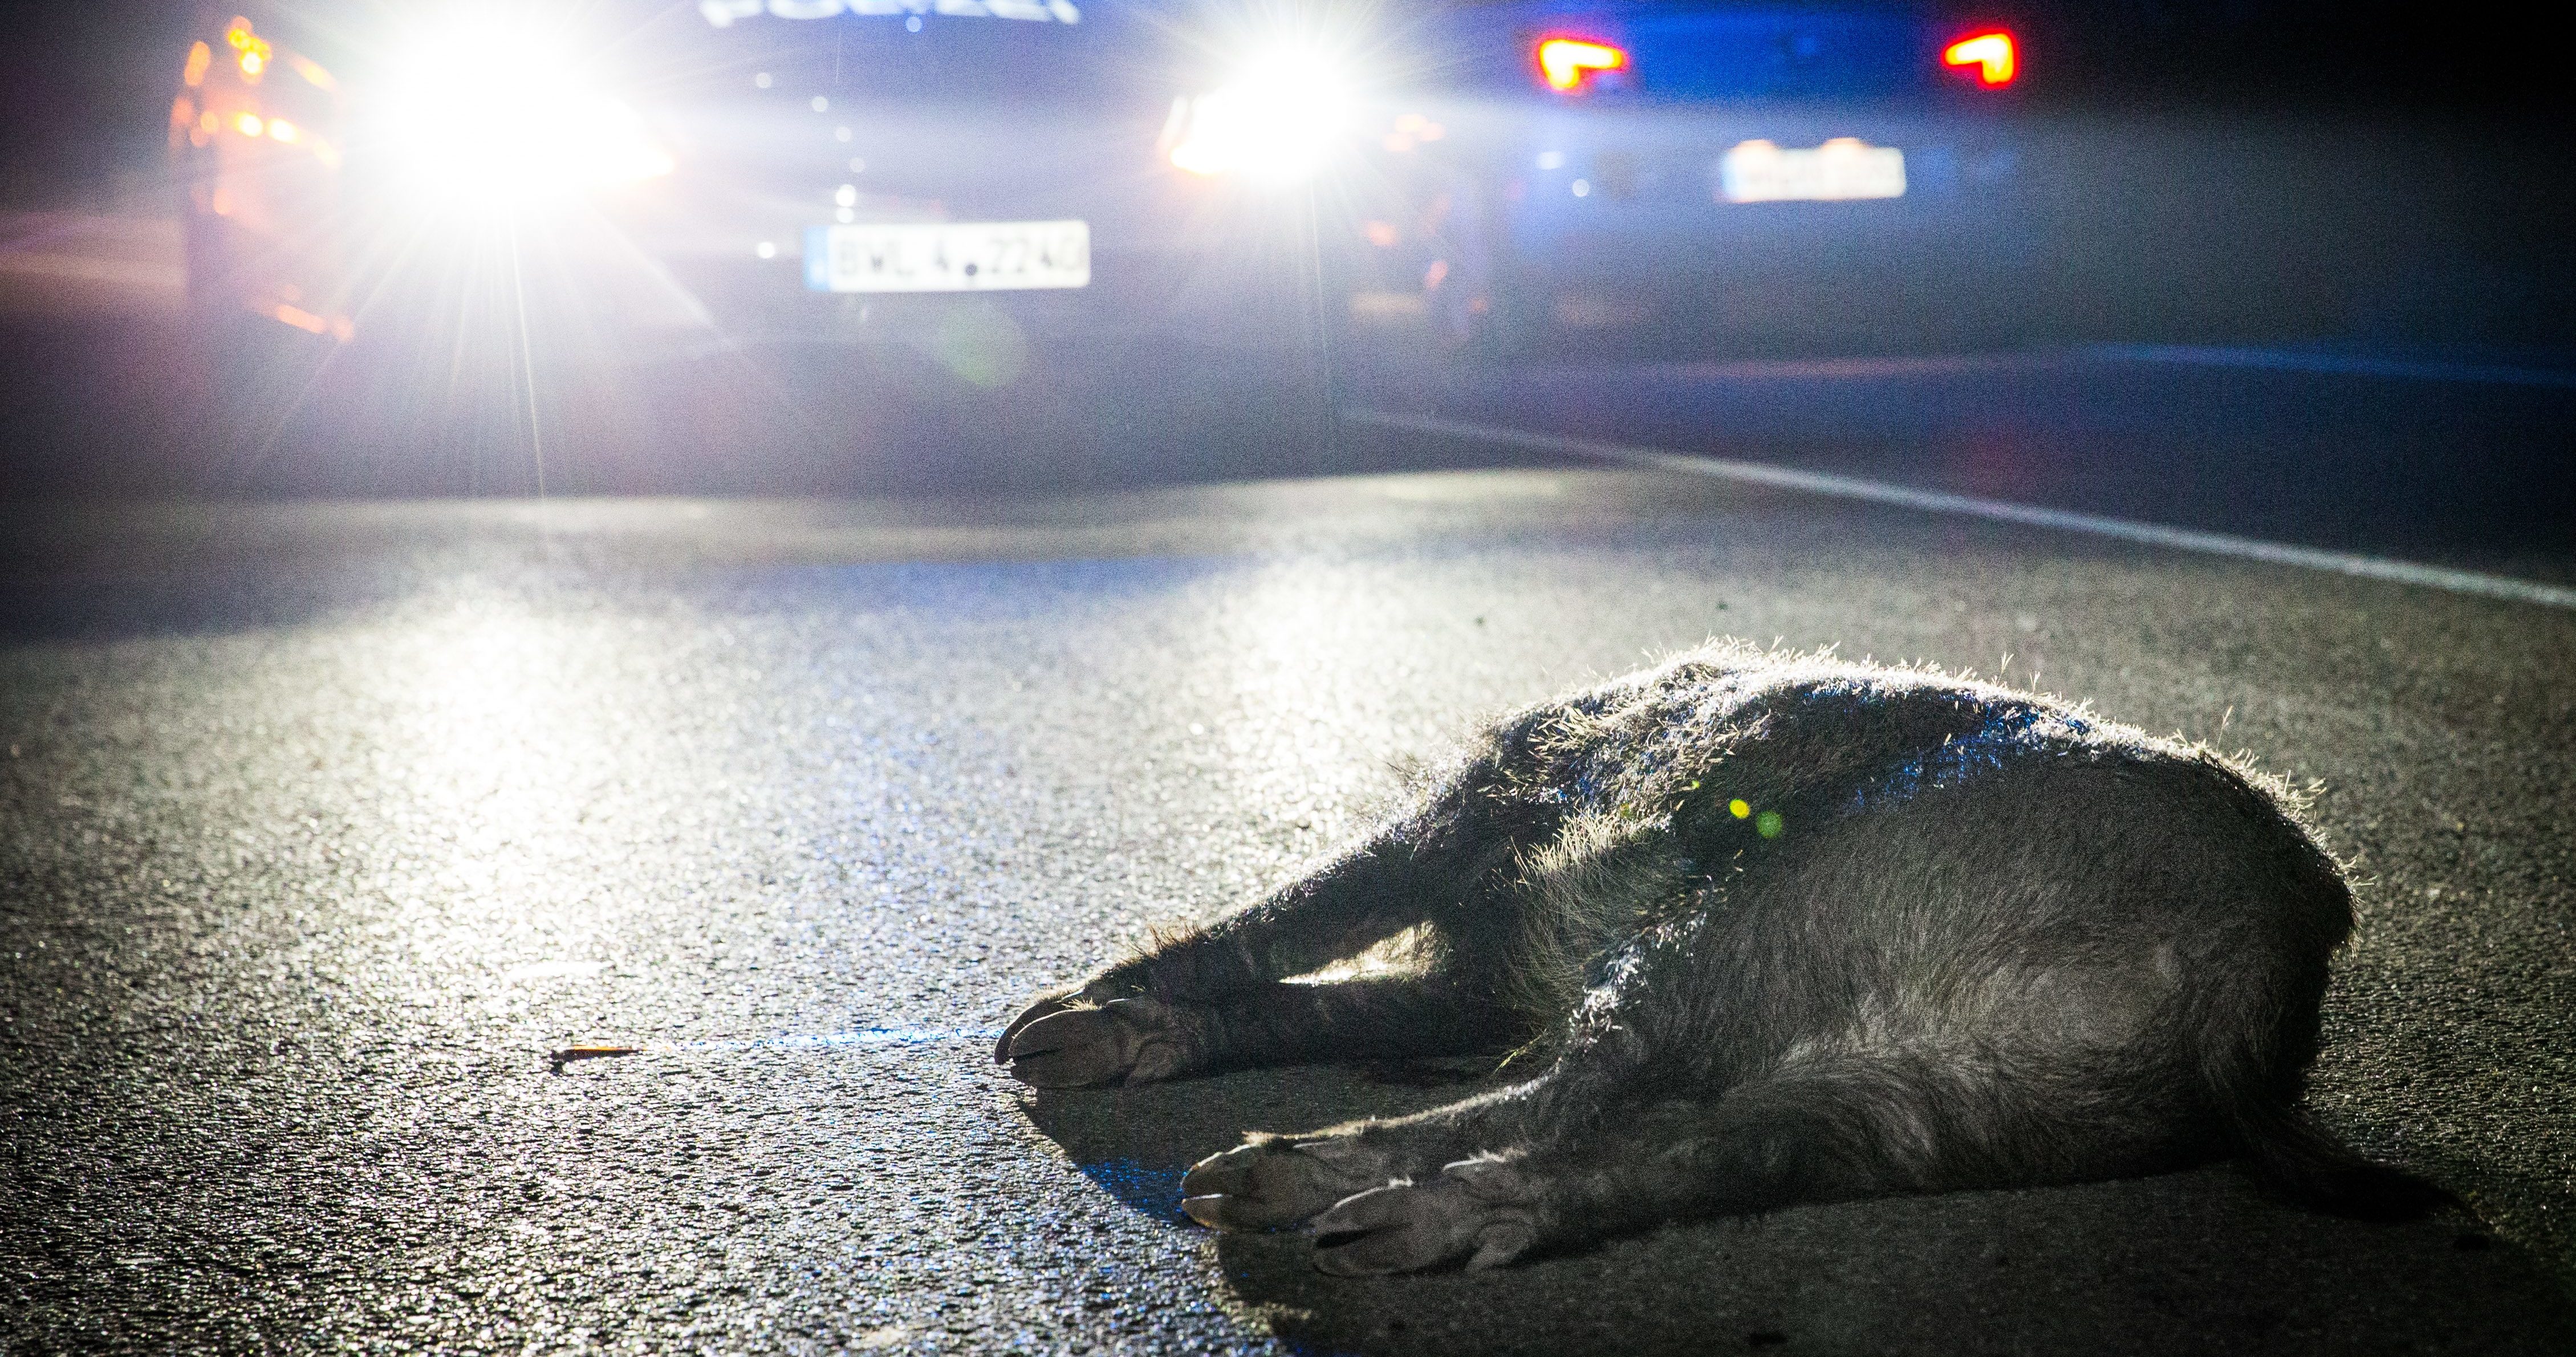 14 wild boars killed at one time on Limburg highway